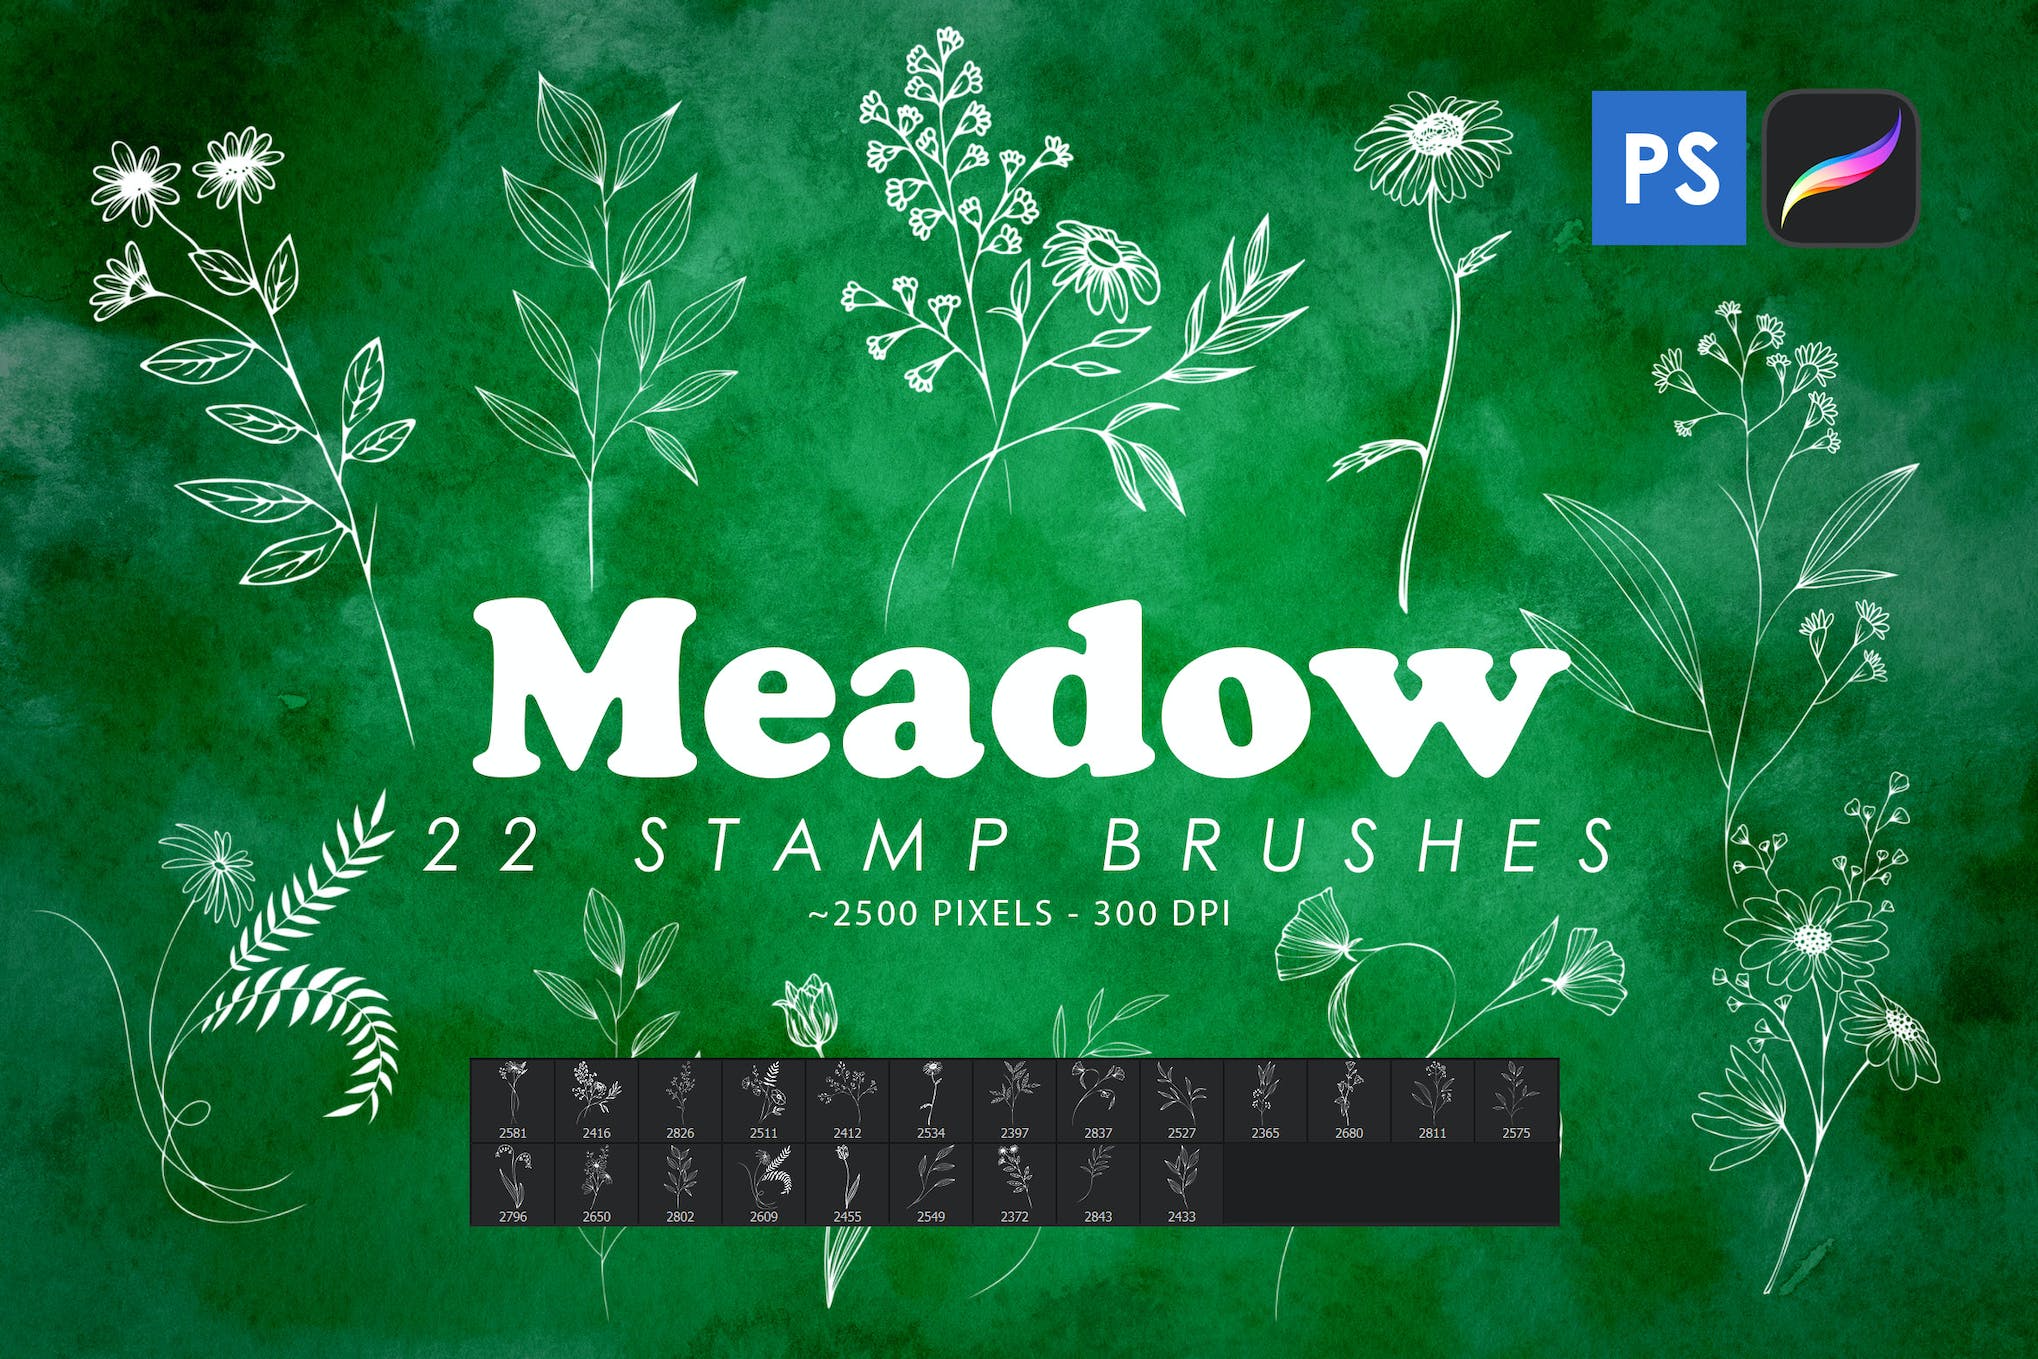 Meadow Grass Stamp Brushes for Photoshop